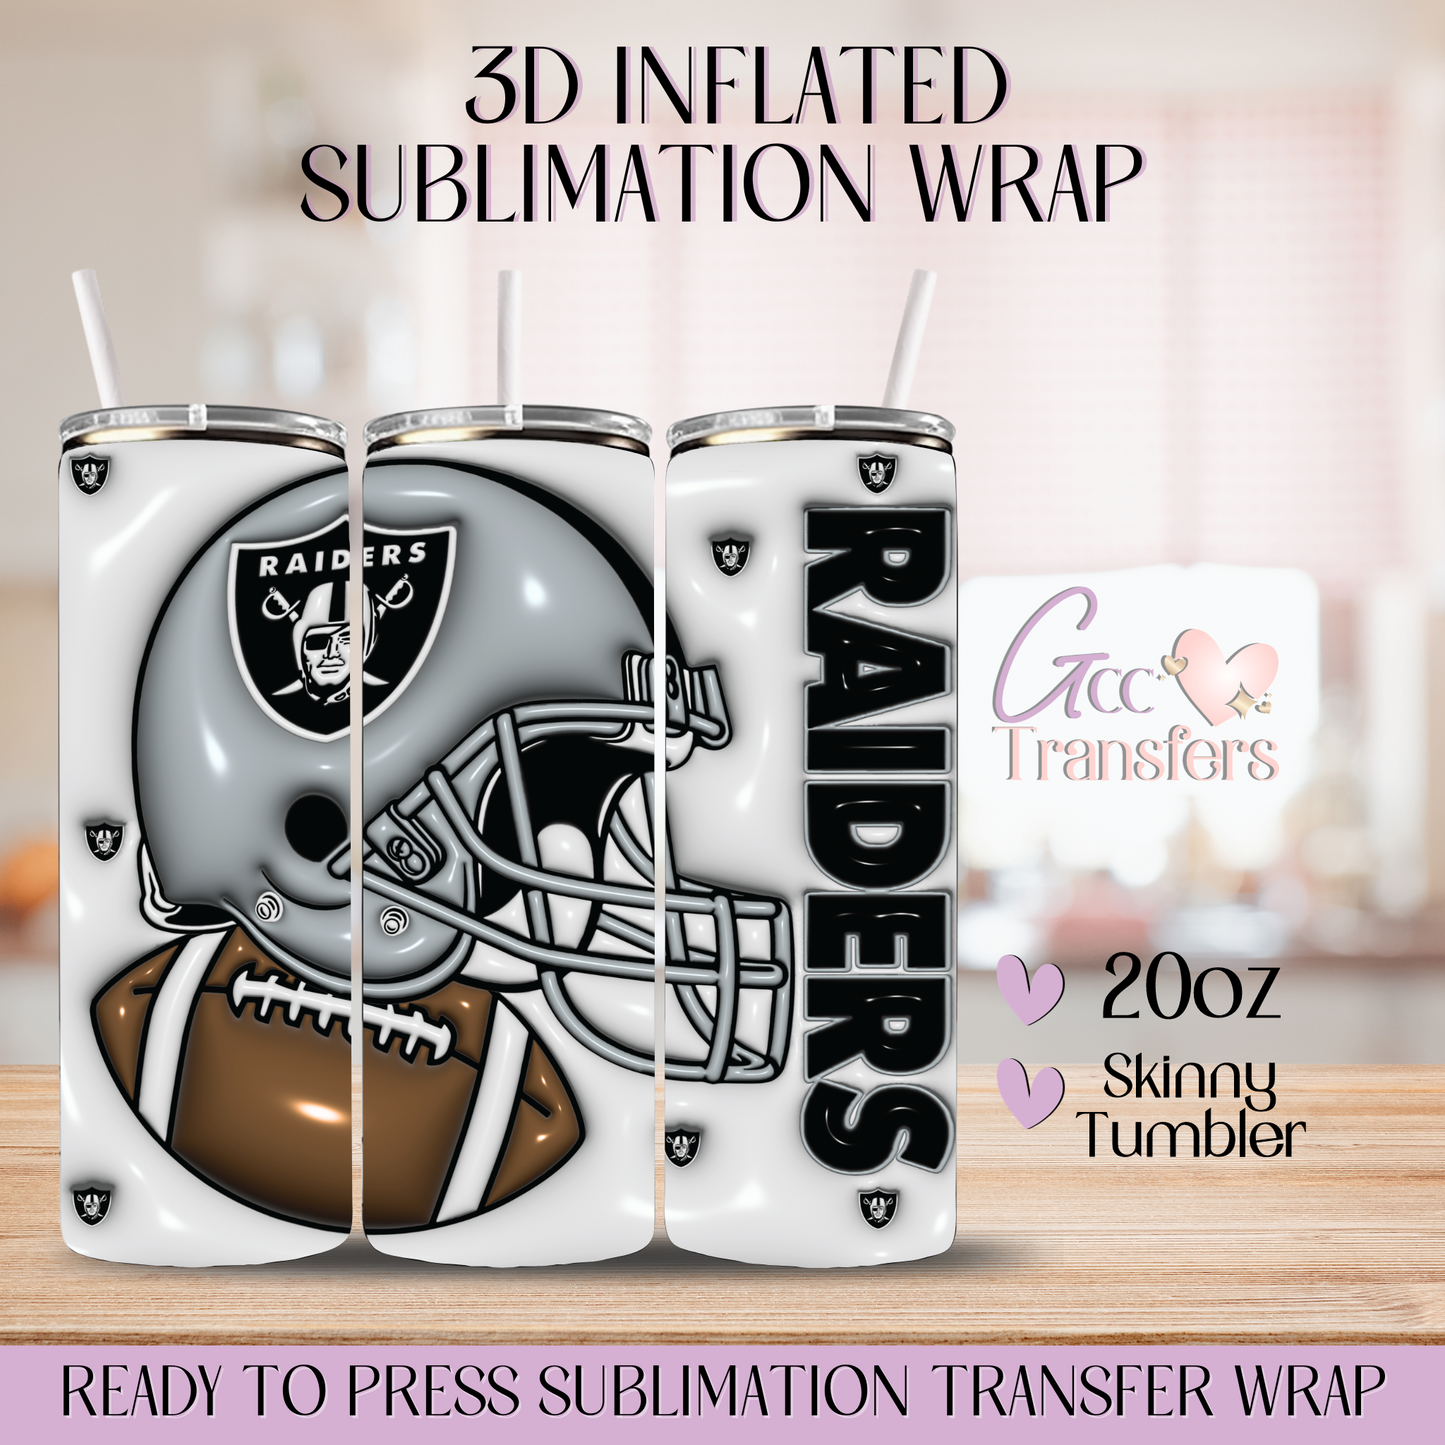 Raiders Football Color - 20oz 3D Inflated Sublimation Wrap